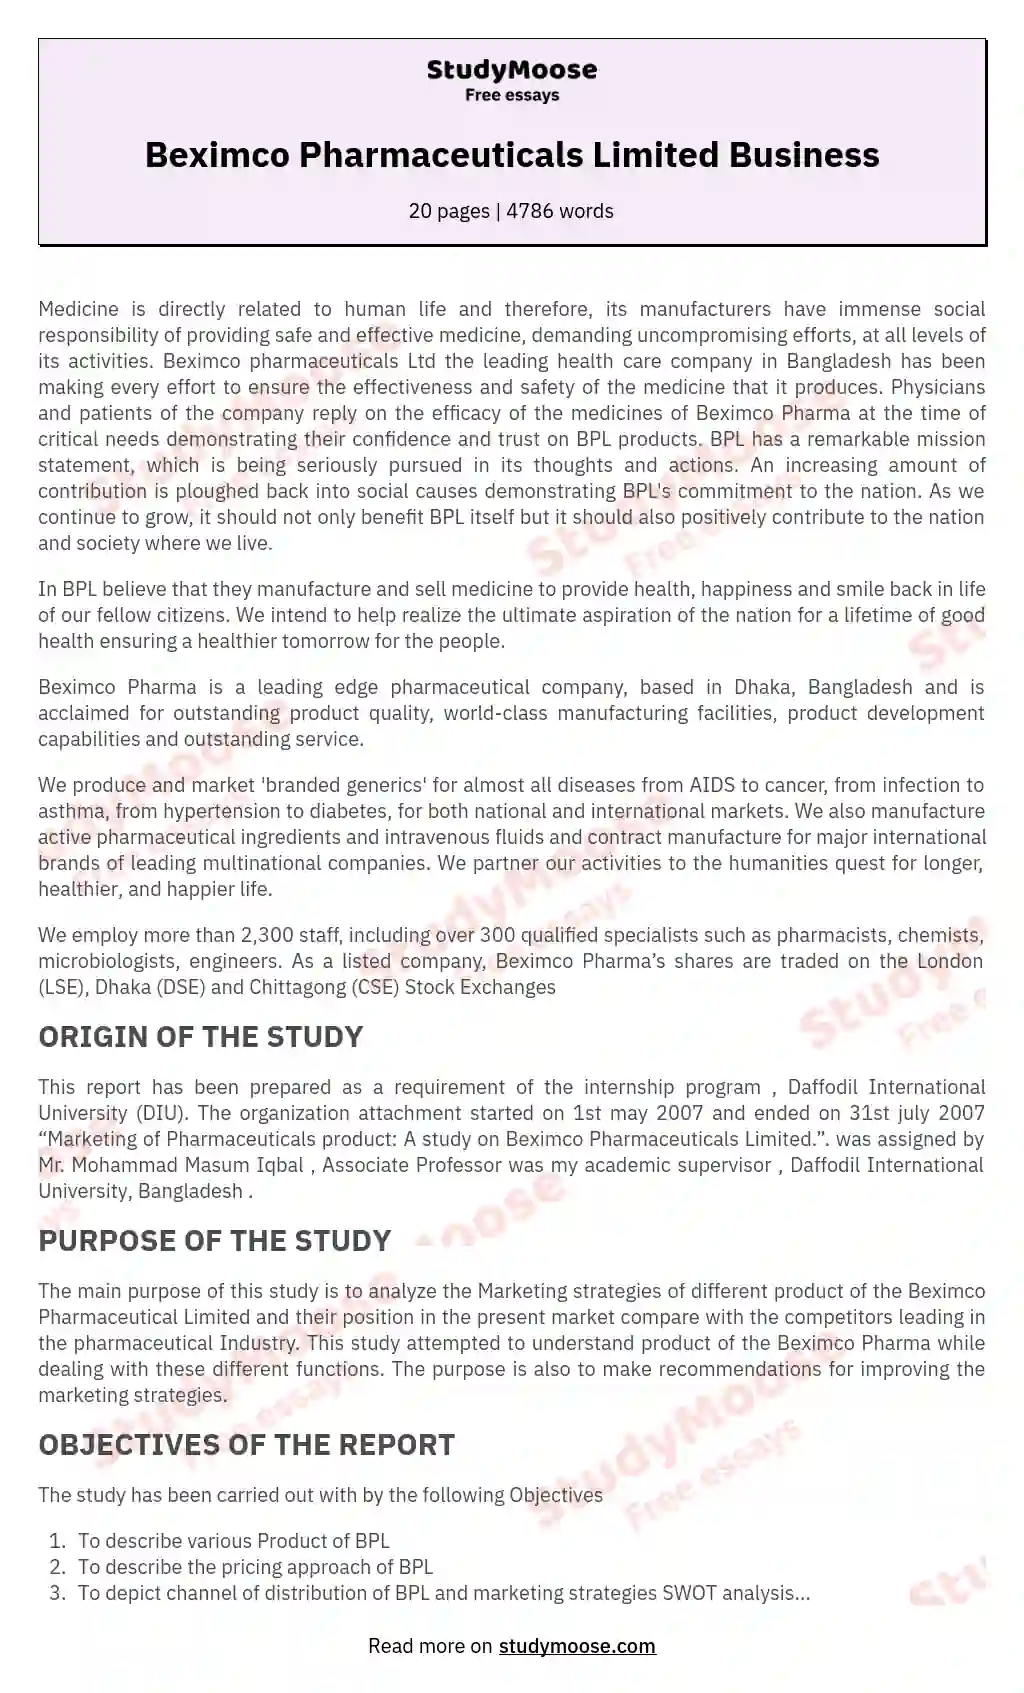 Beximco Pharmaceuticals Limited Business essay